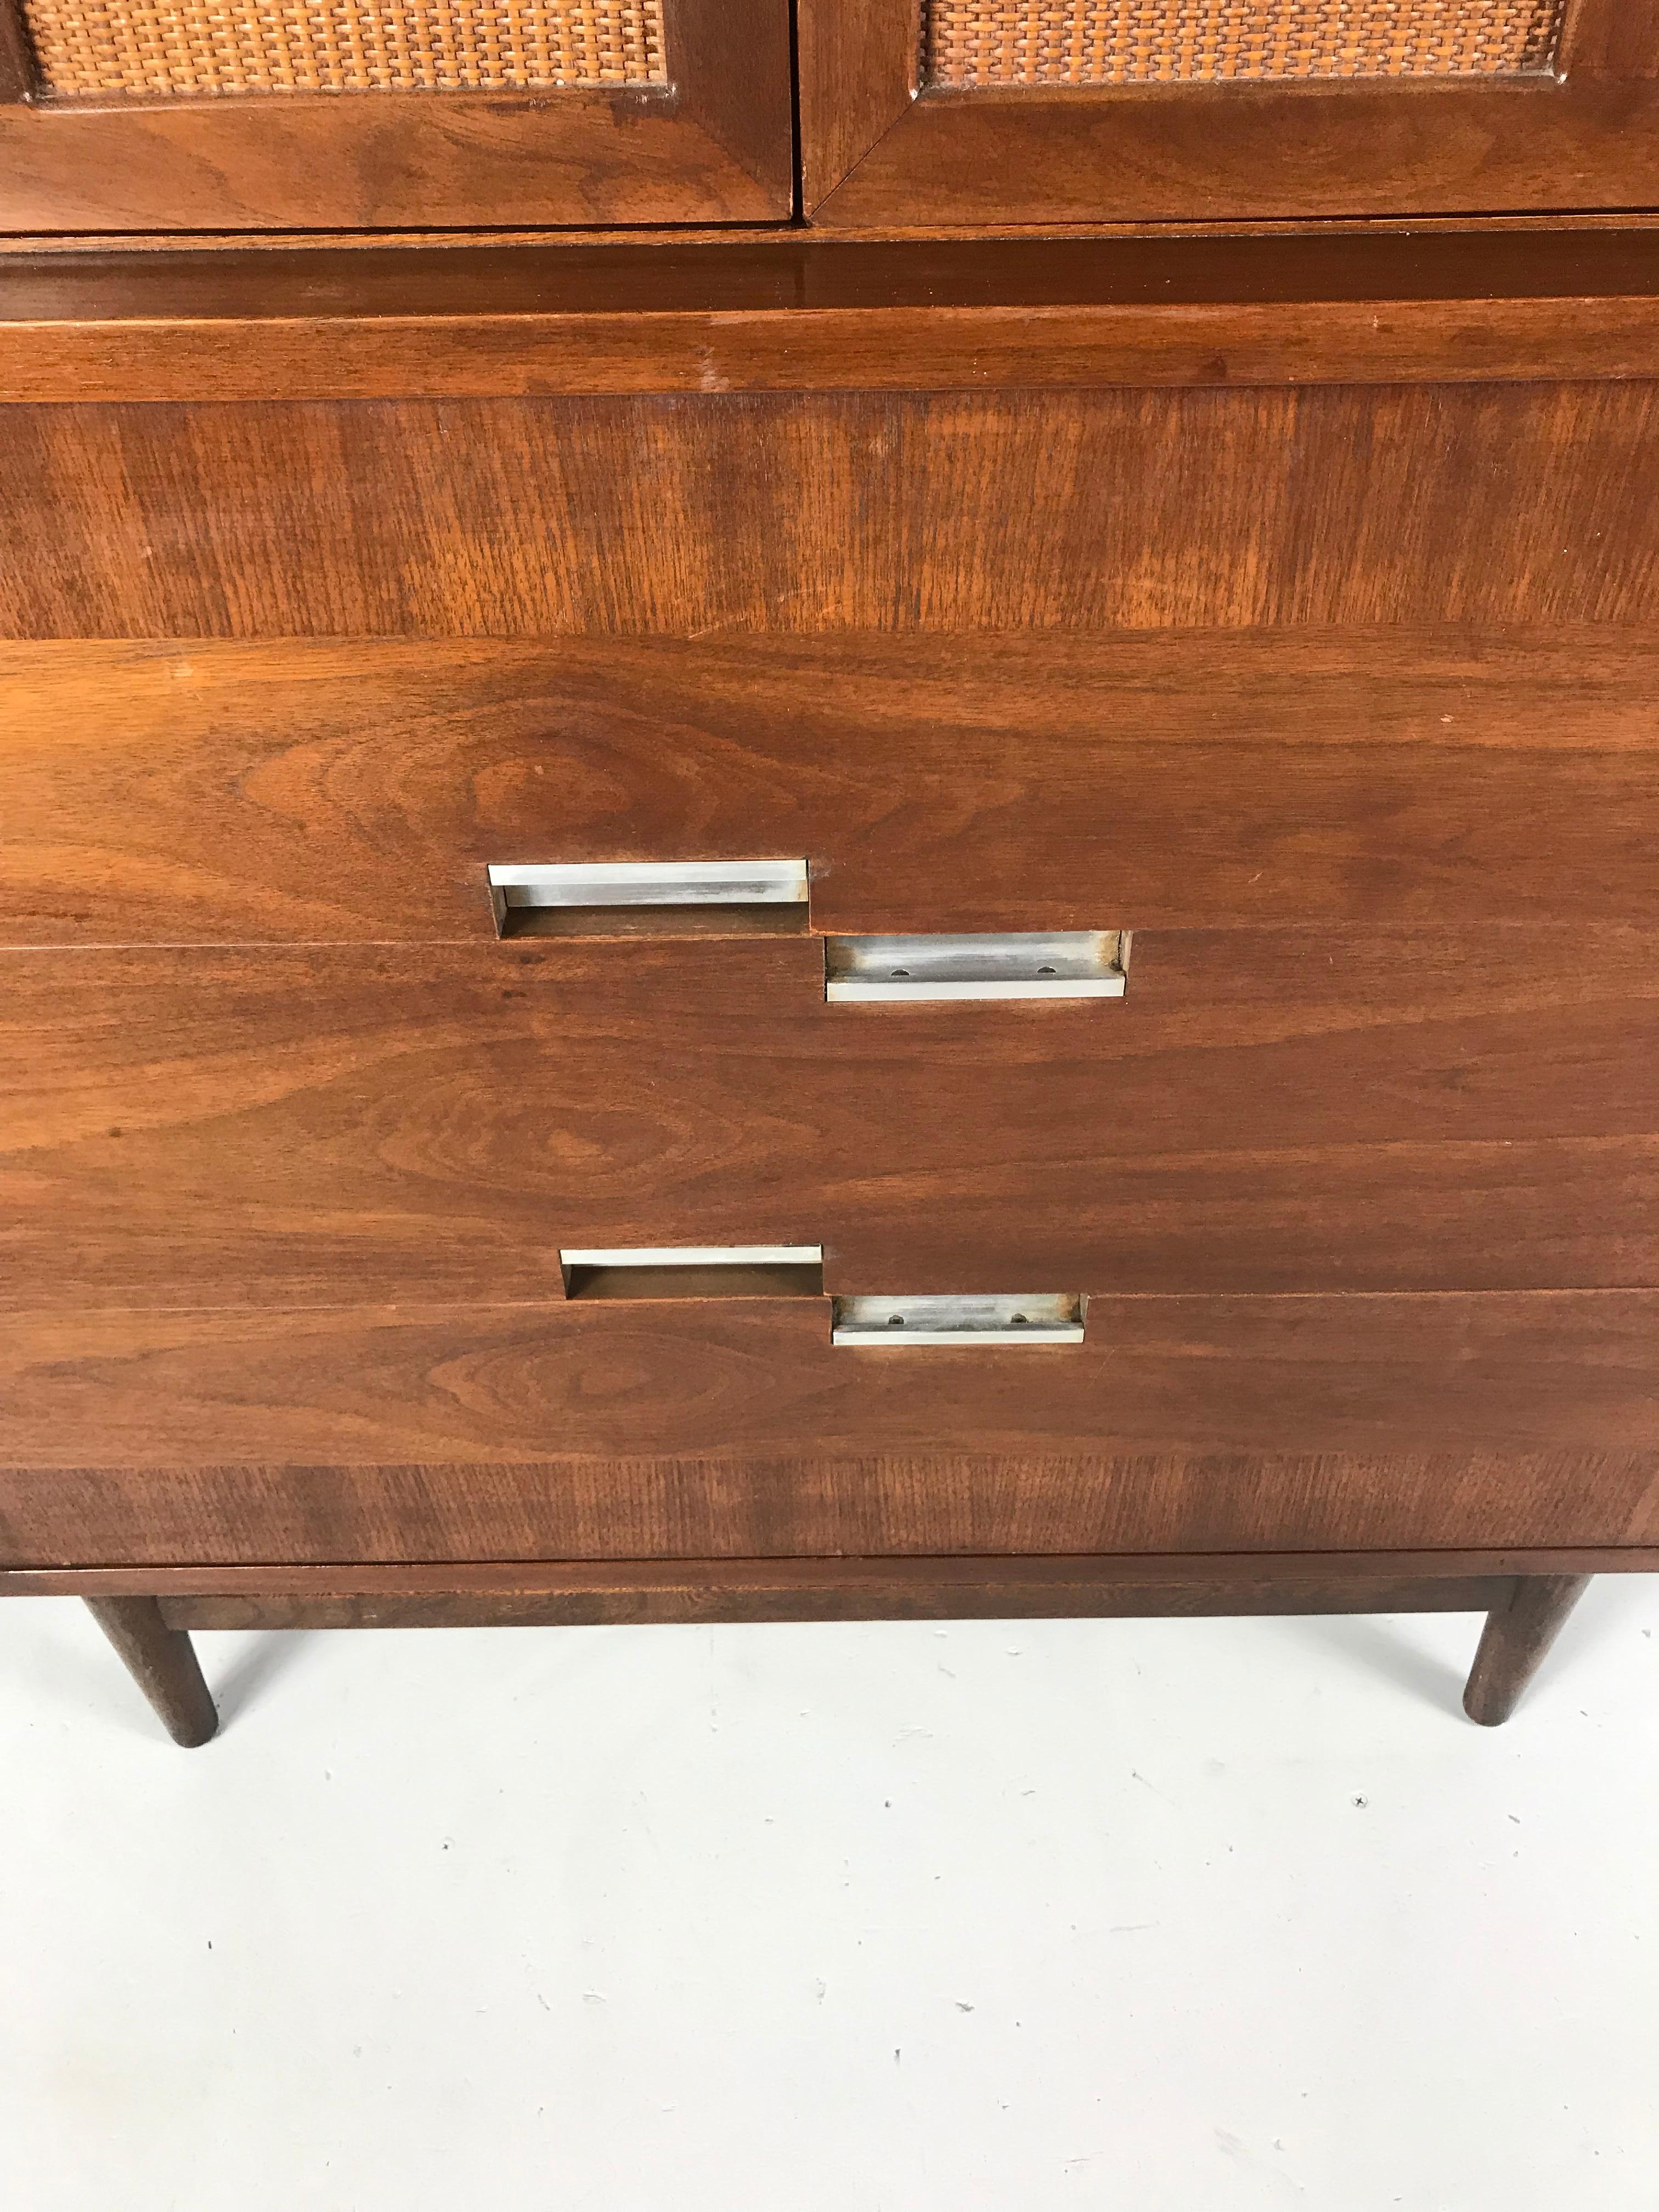 This stylized dresser features contrasting walnut veneer, two doors with four rattan panels, and this lines signature inset nickel “x” on each corner of the top. Rich walnut grain graces all surfaces. With an angular profile, this vintage piece has